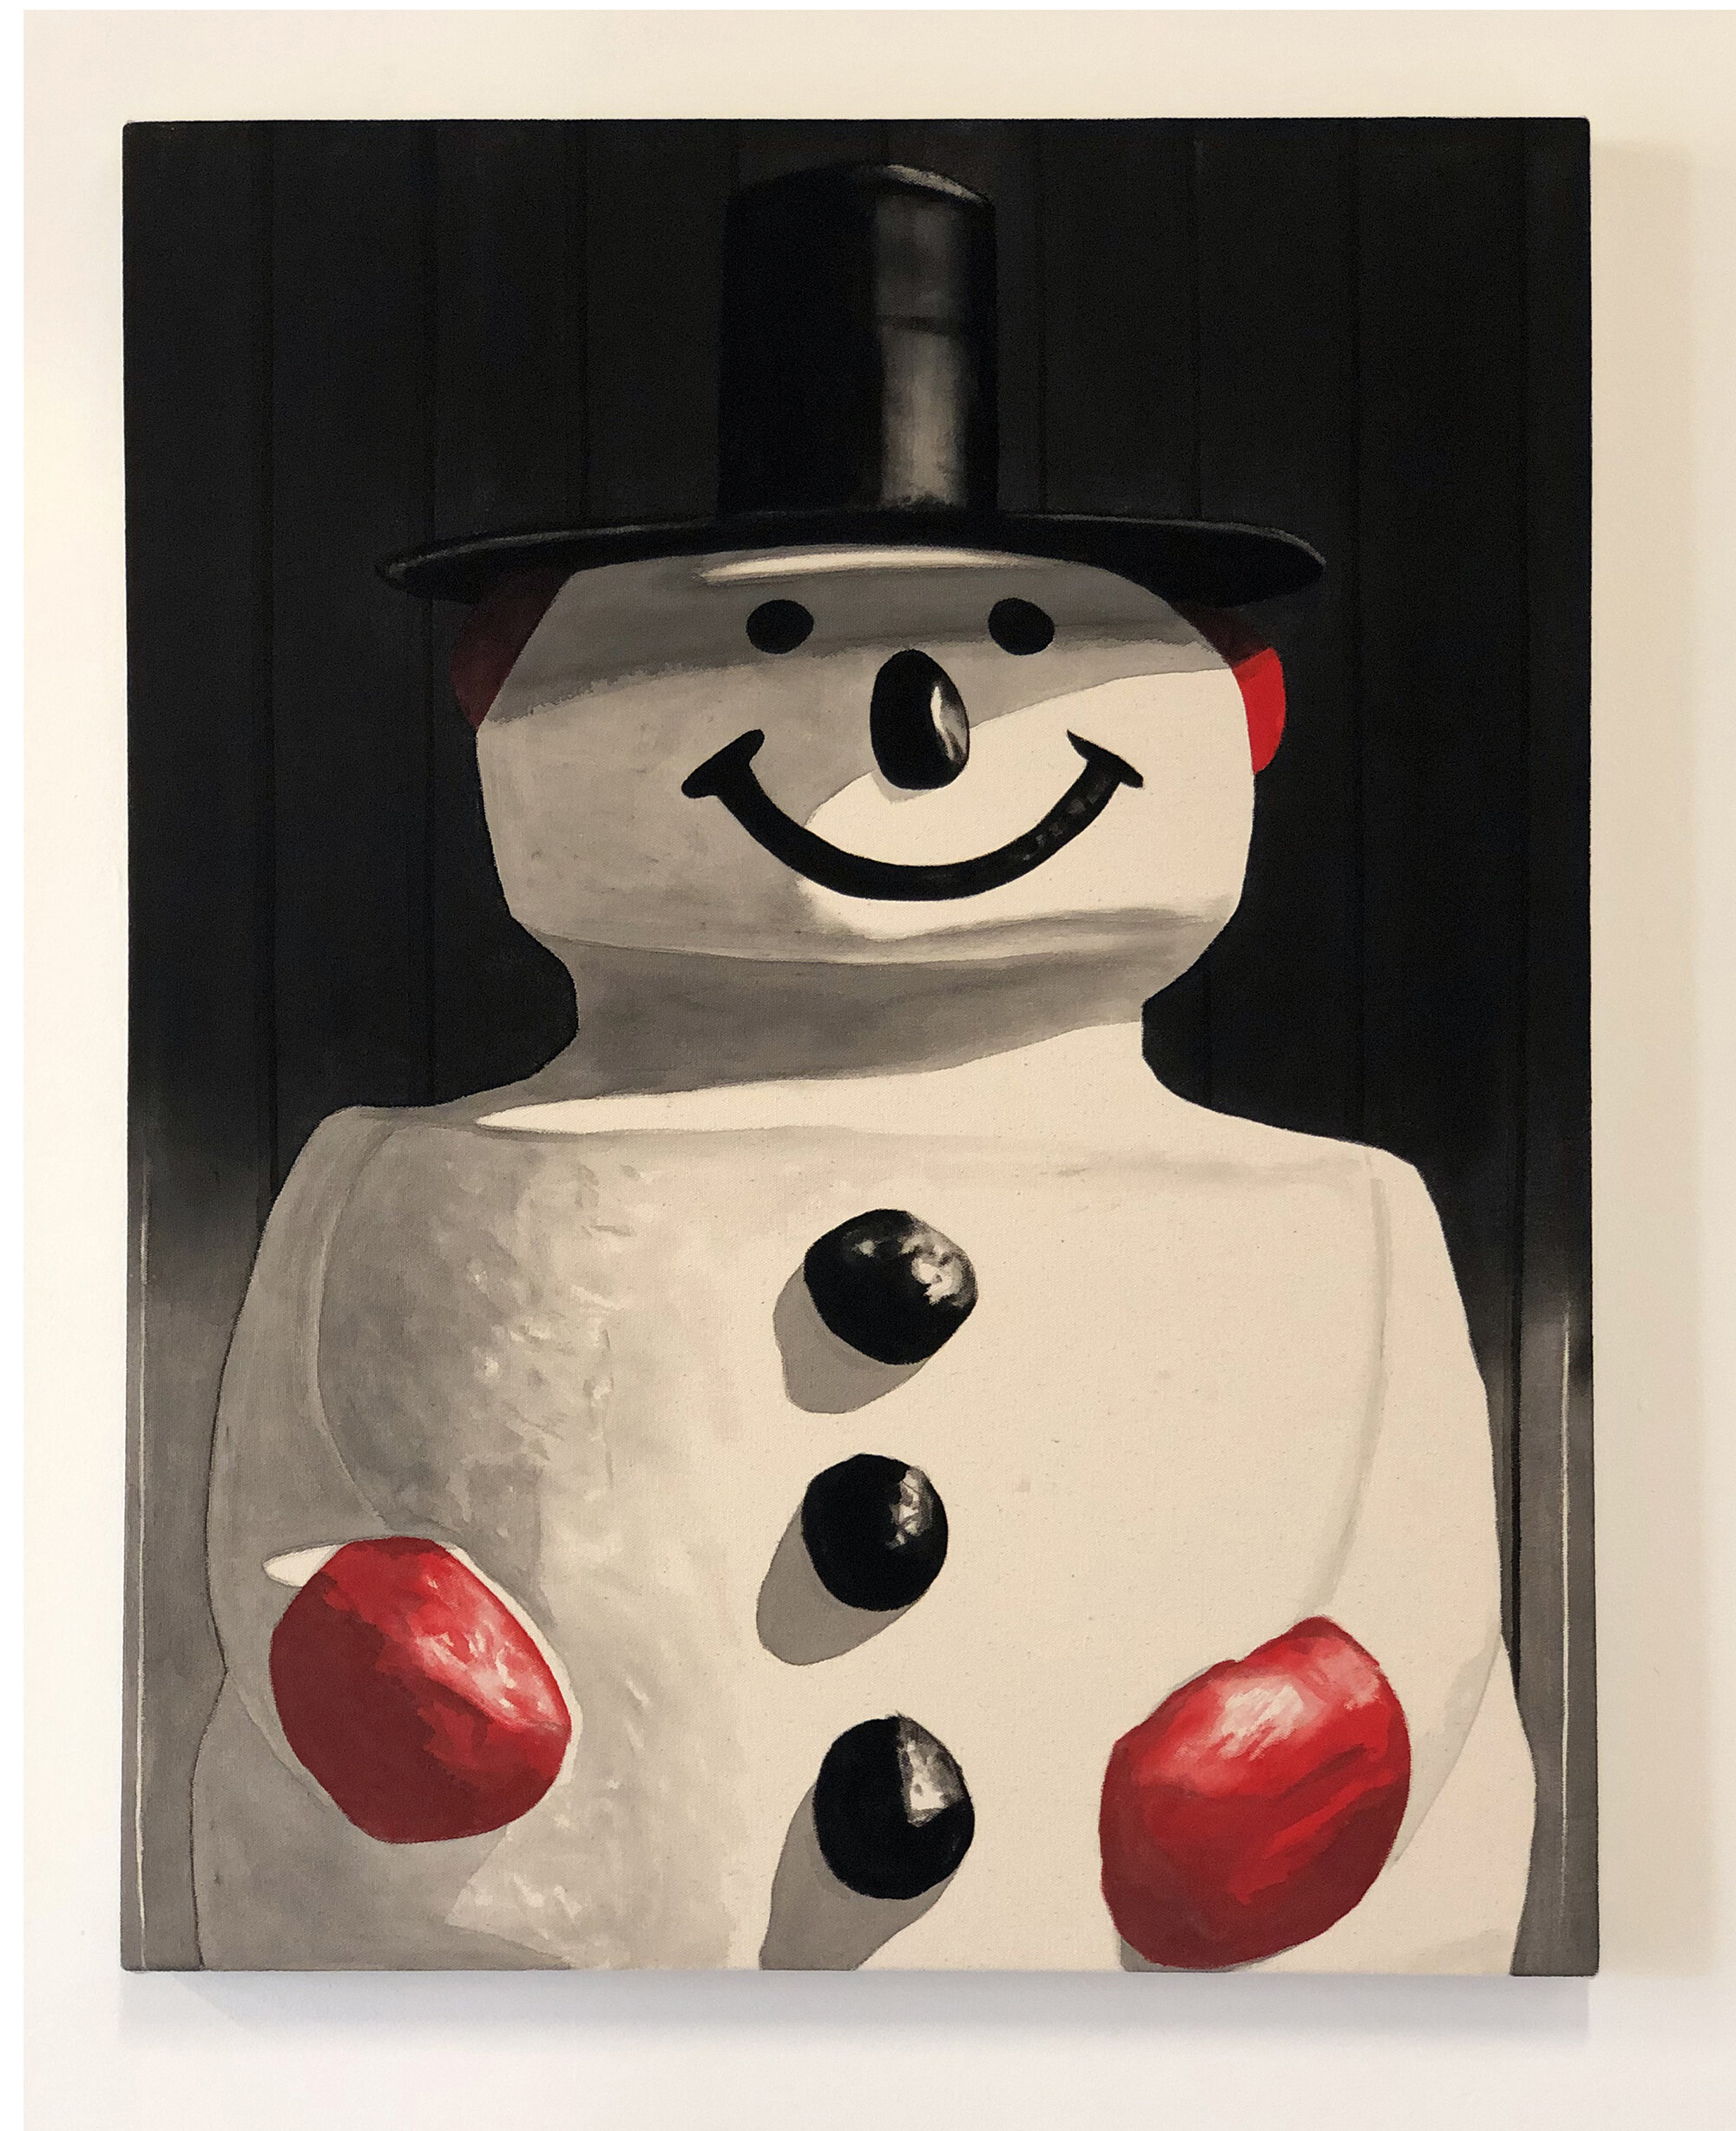   Snowman (I) , 2020 Black gesso and acrylic on canvas 24 x 30 inches (61cm x 76cm) 